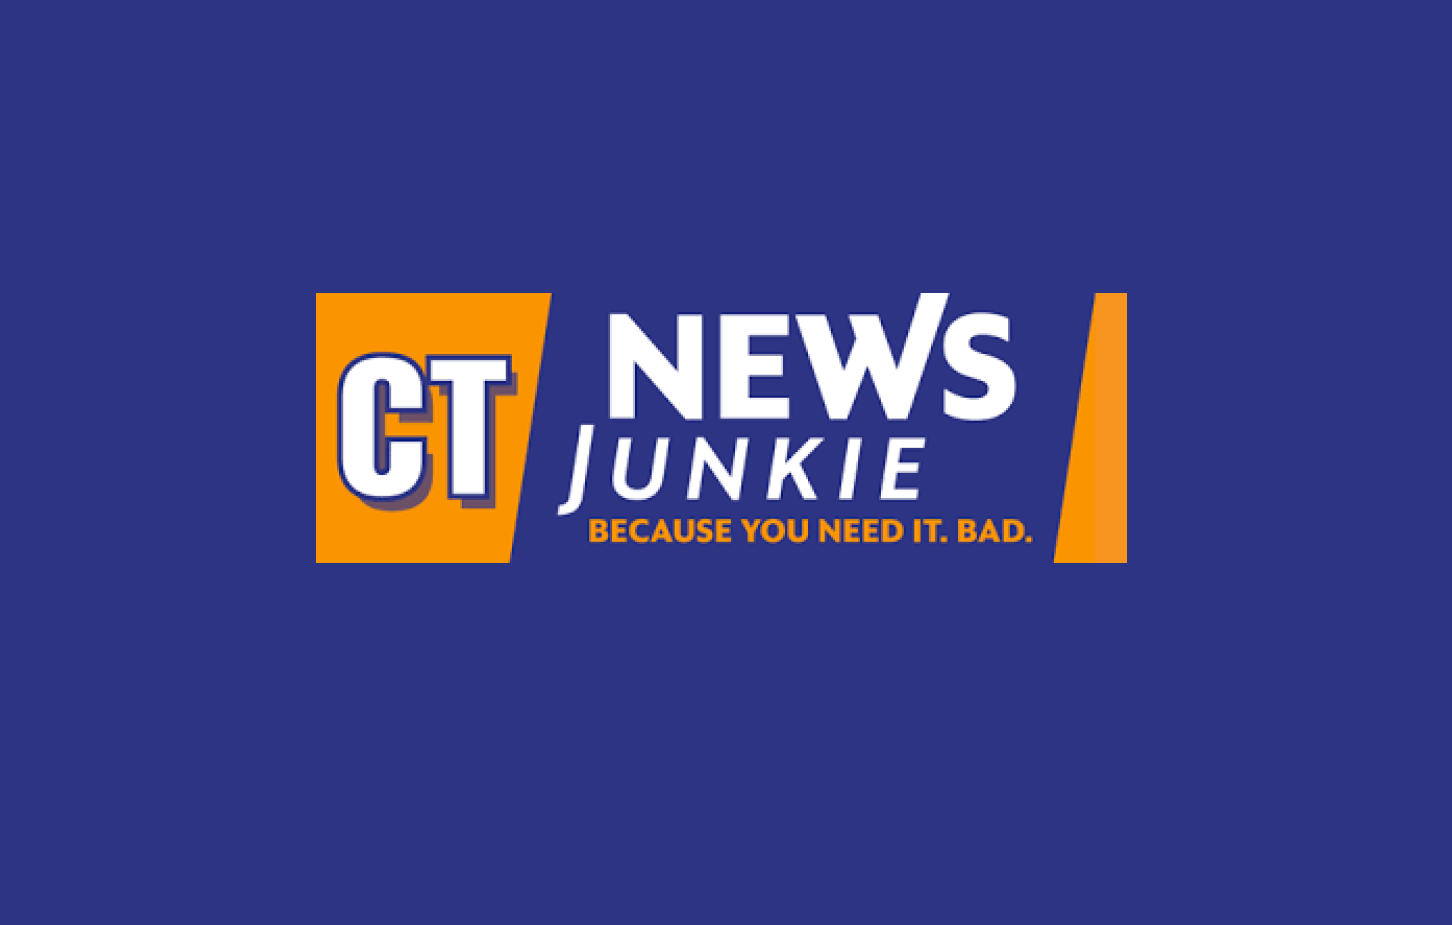 CT News Junkie. Because you Need it bad. 